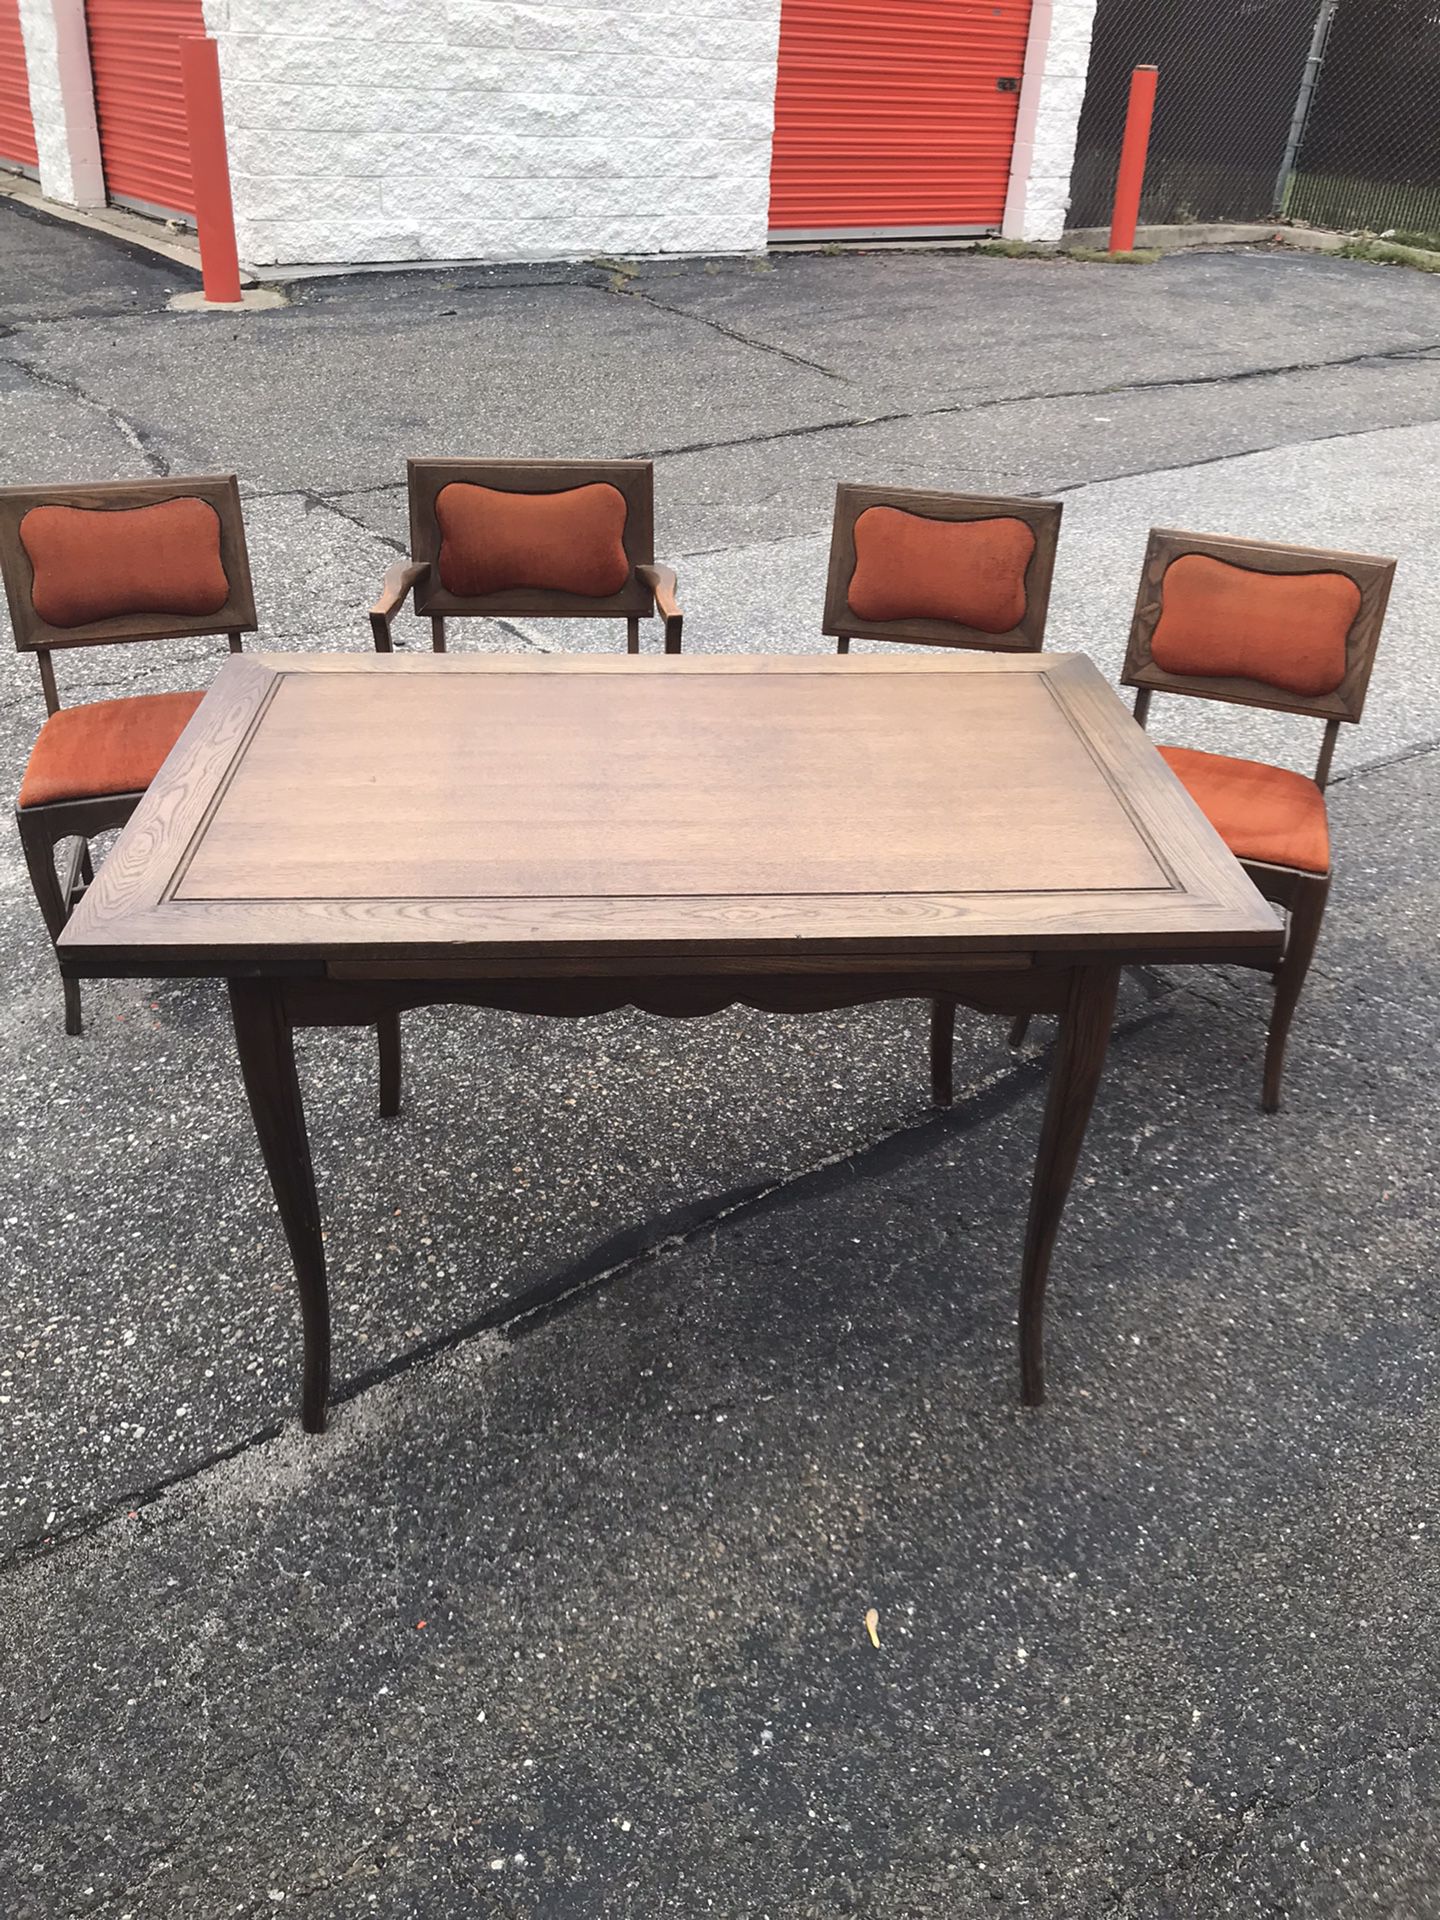 Antique Dining Room Table And Chairs